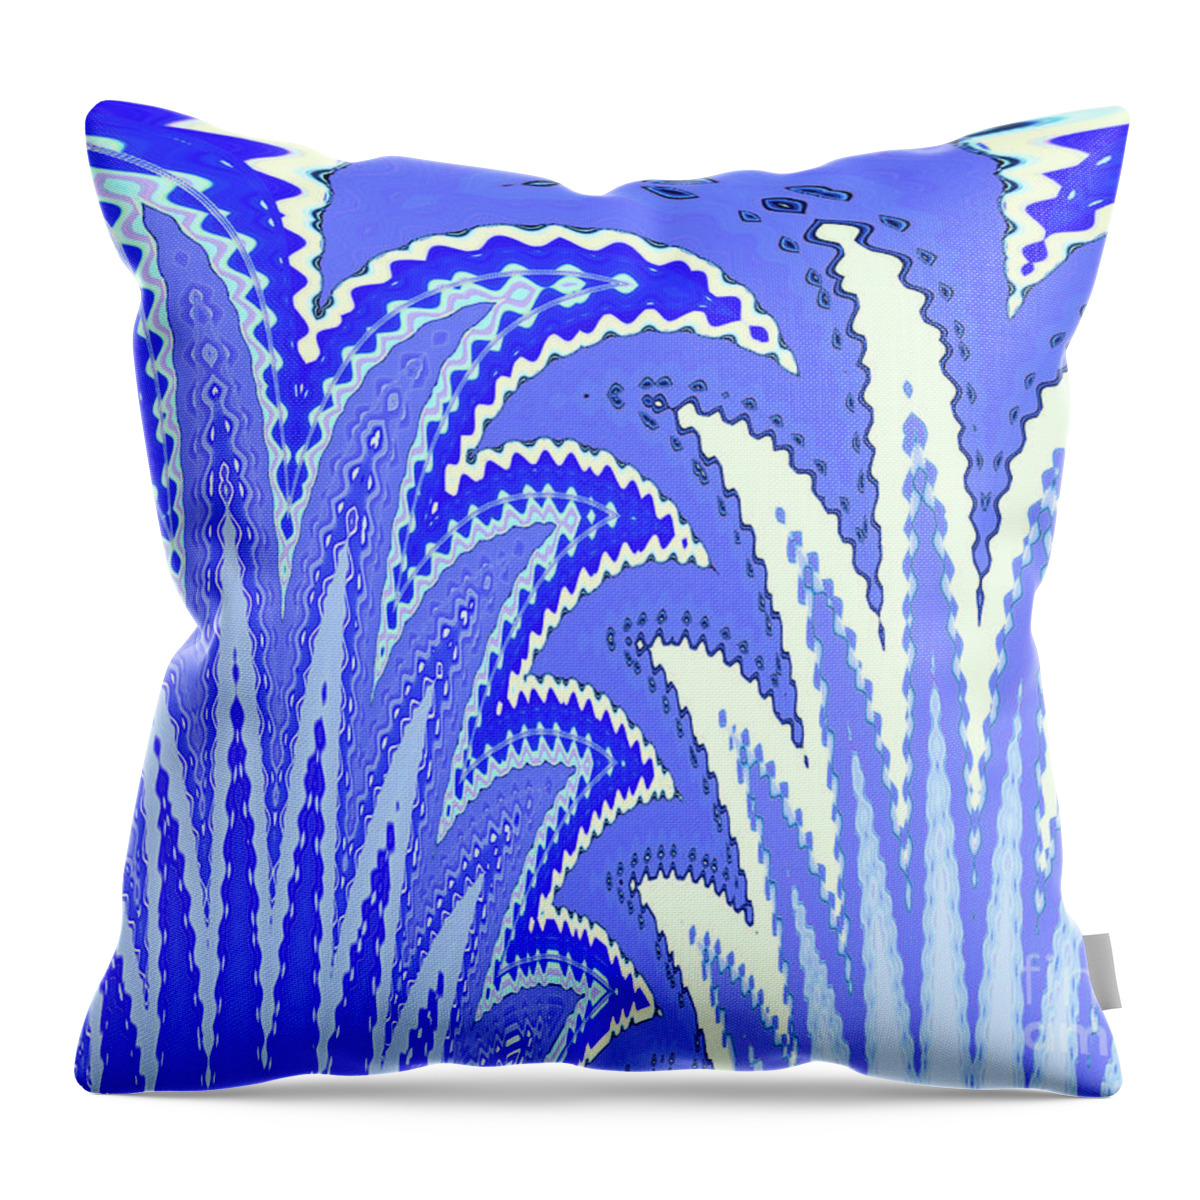 Botanical Throw Pillow featuring the digital art Botanicals In Blue by Ann Johndro-Collins